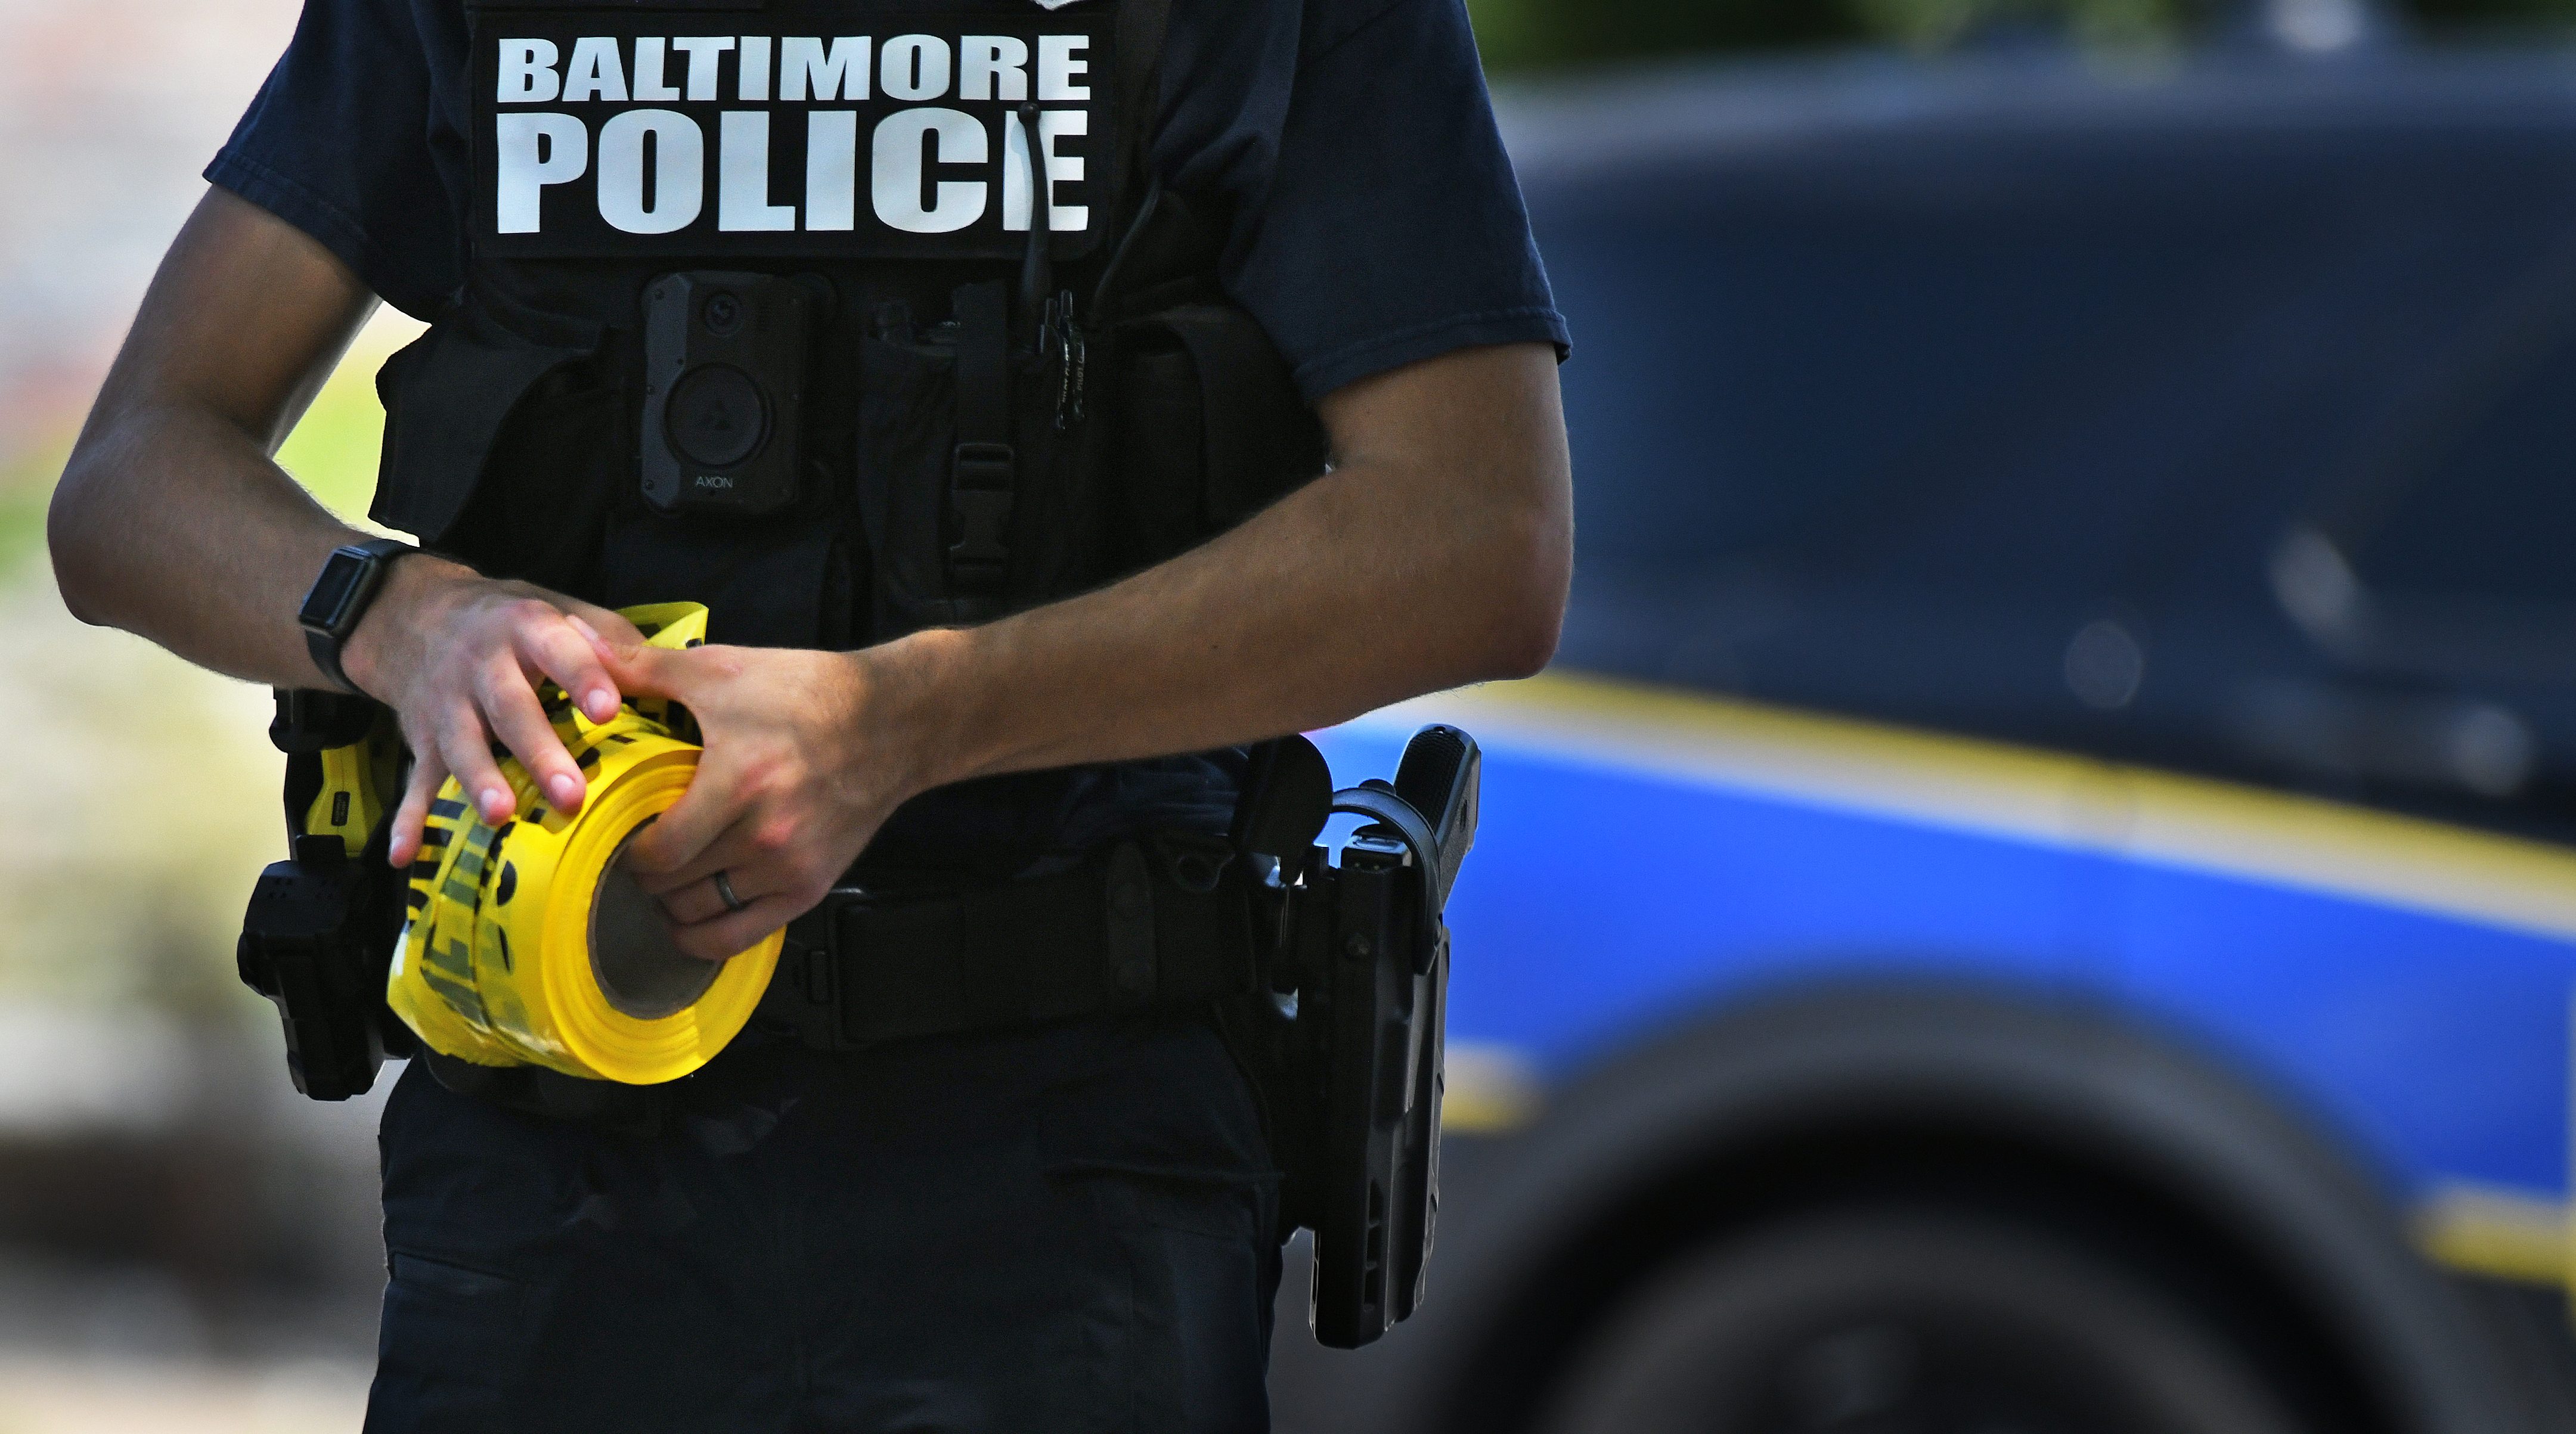 Baltimore security guard claims self-defense in fatal shooting of